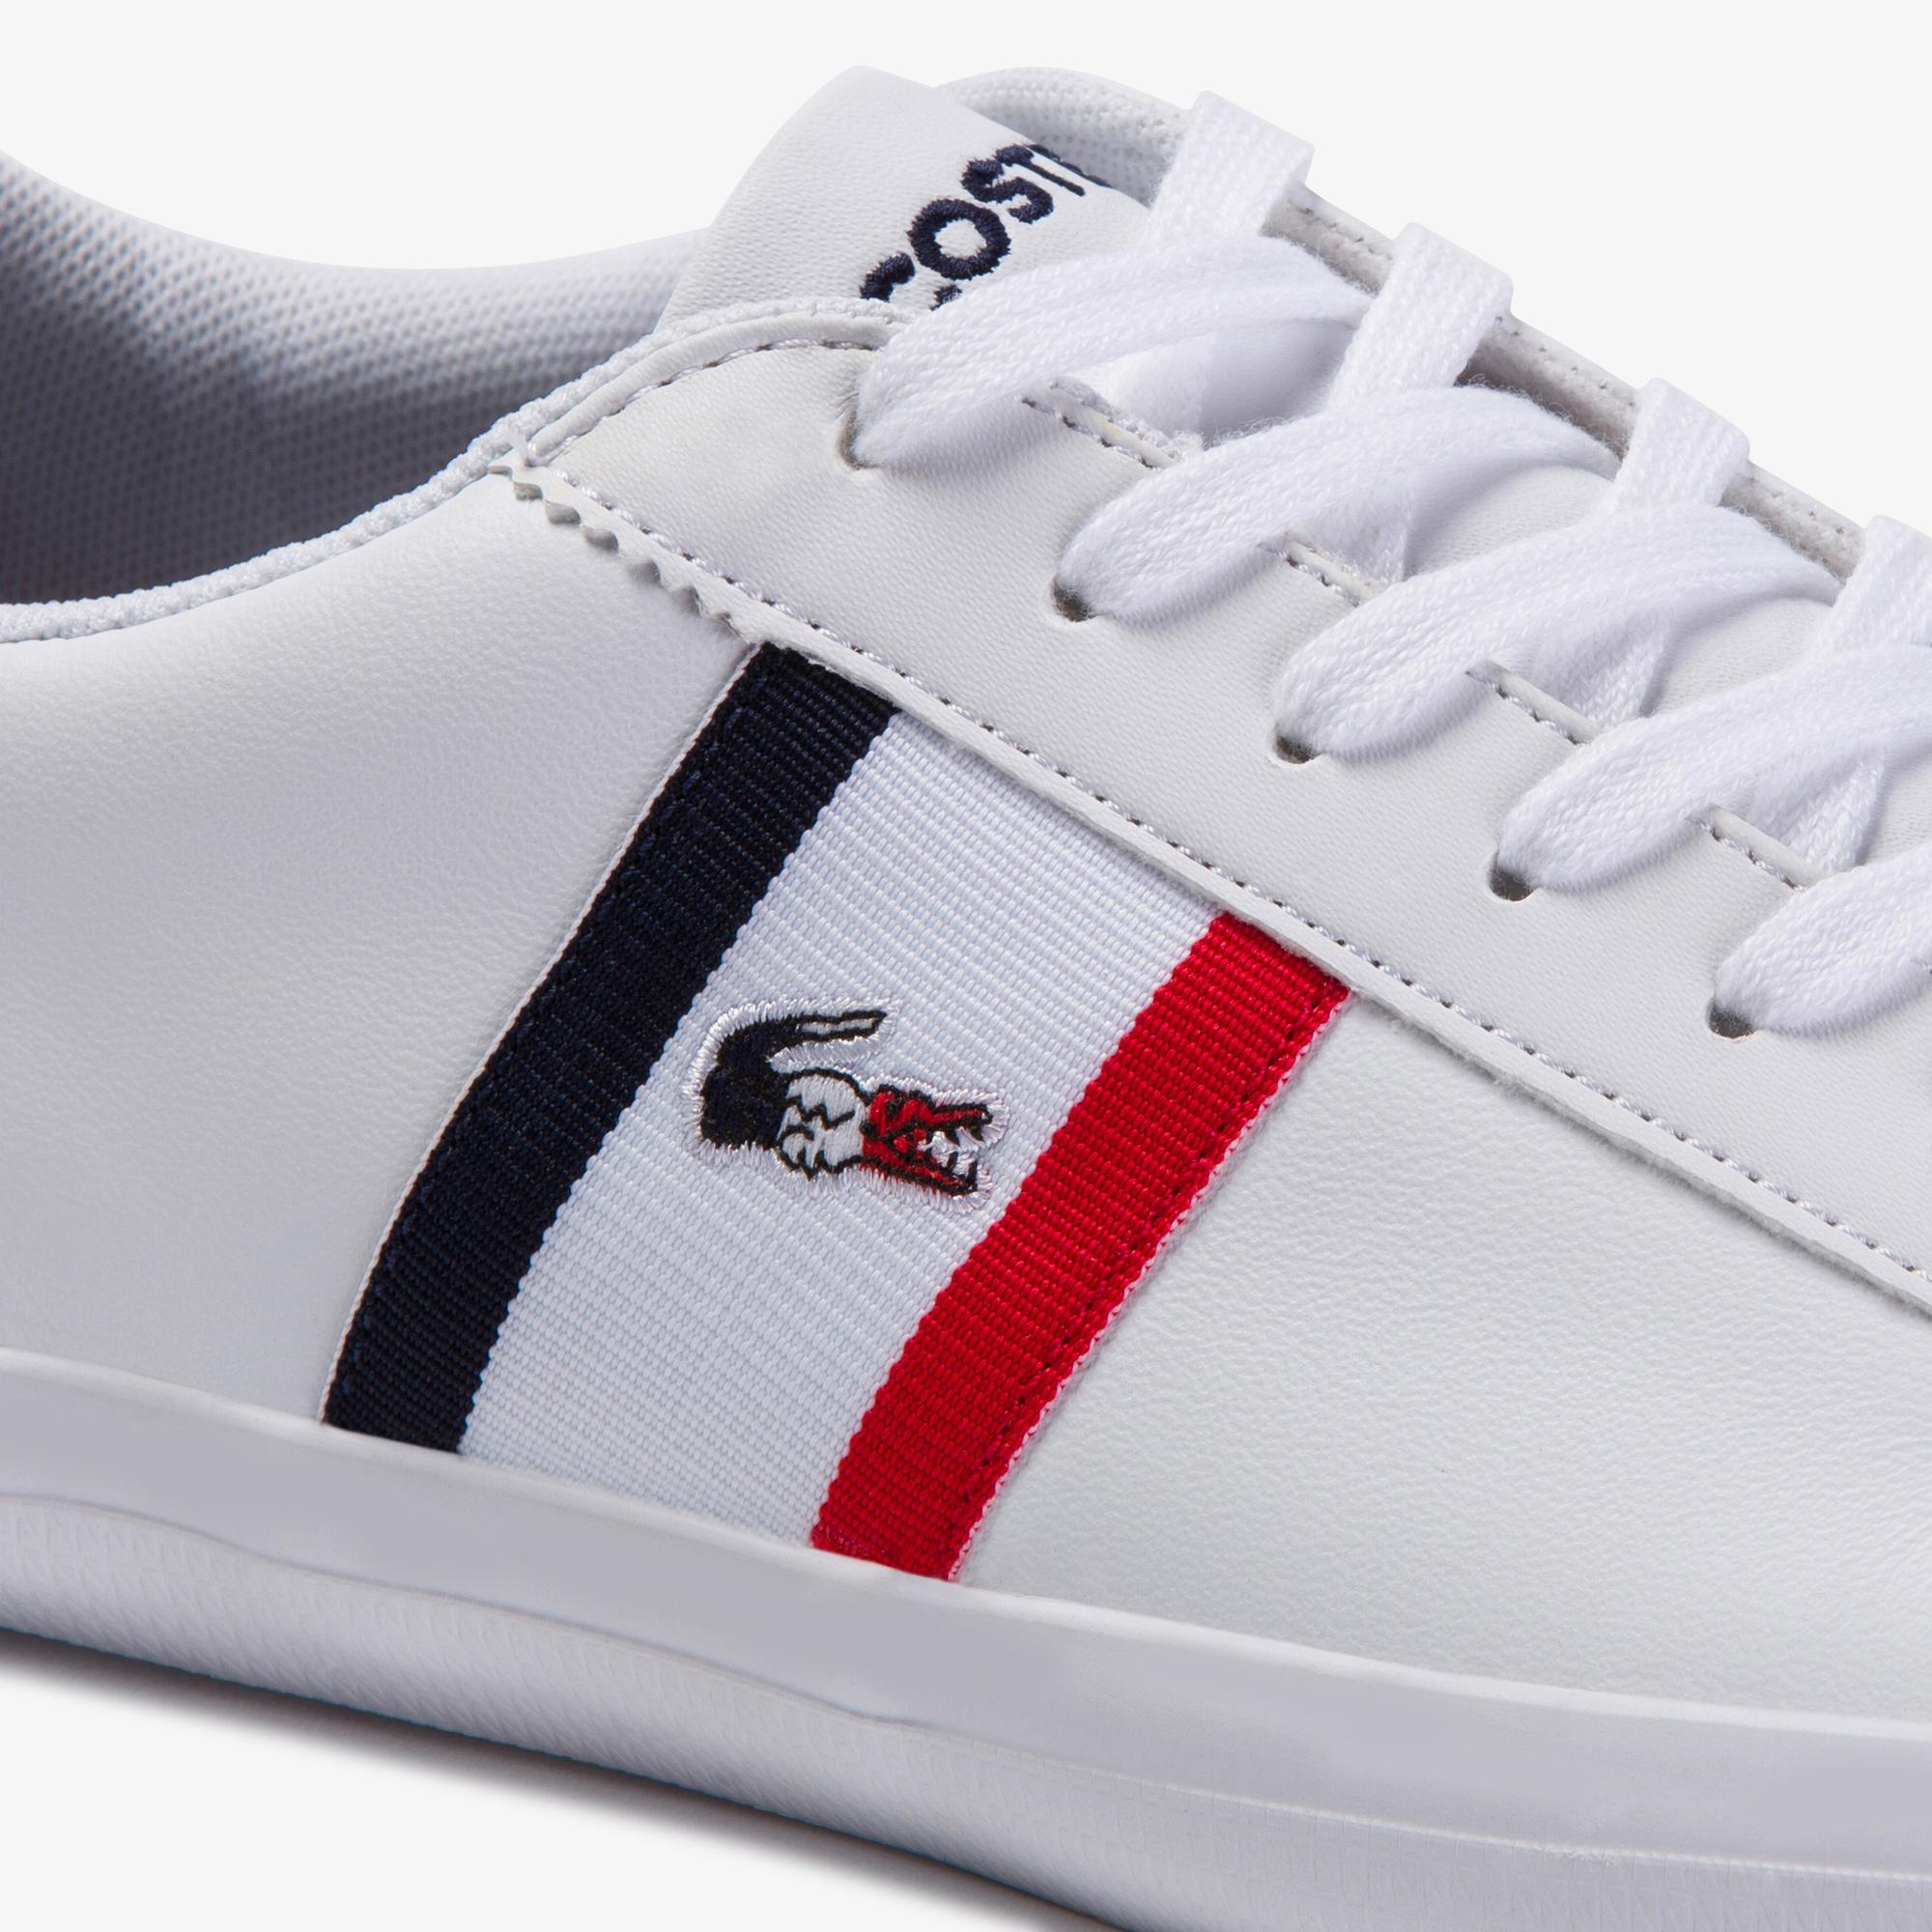 Lacoste Men's Lerond Tricolore Leather and Synthetic Trainers